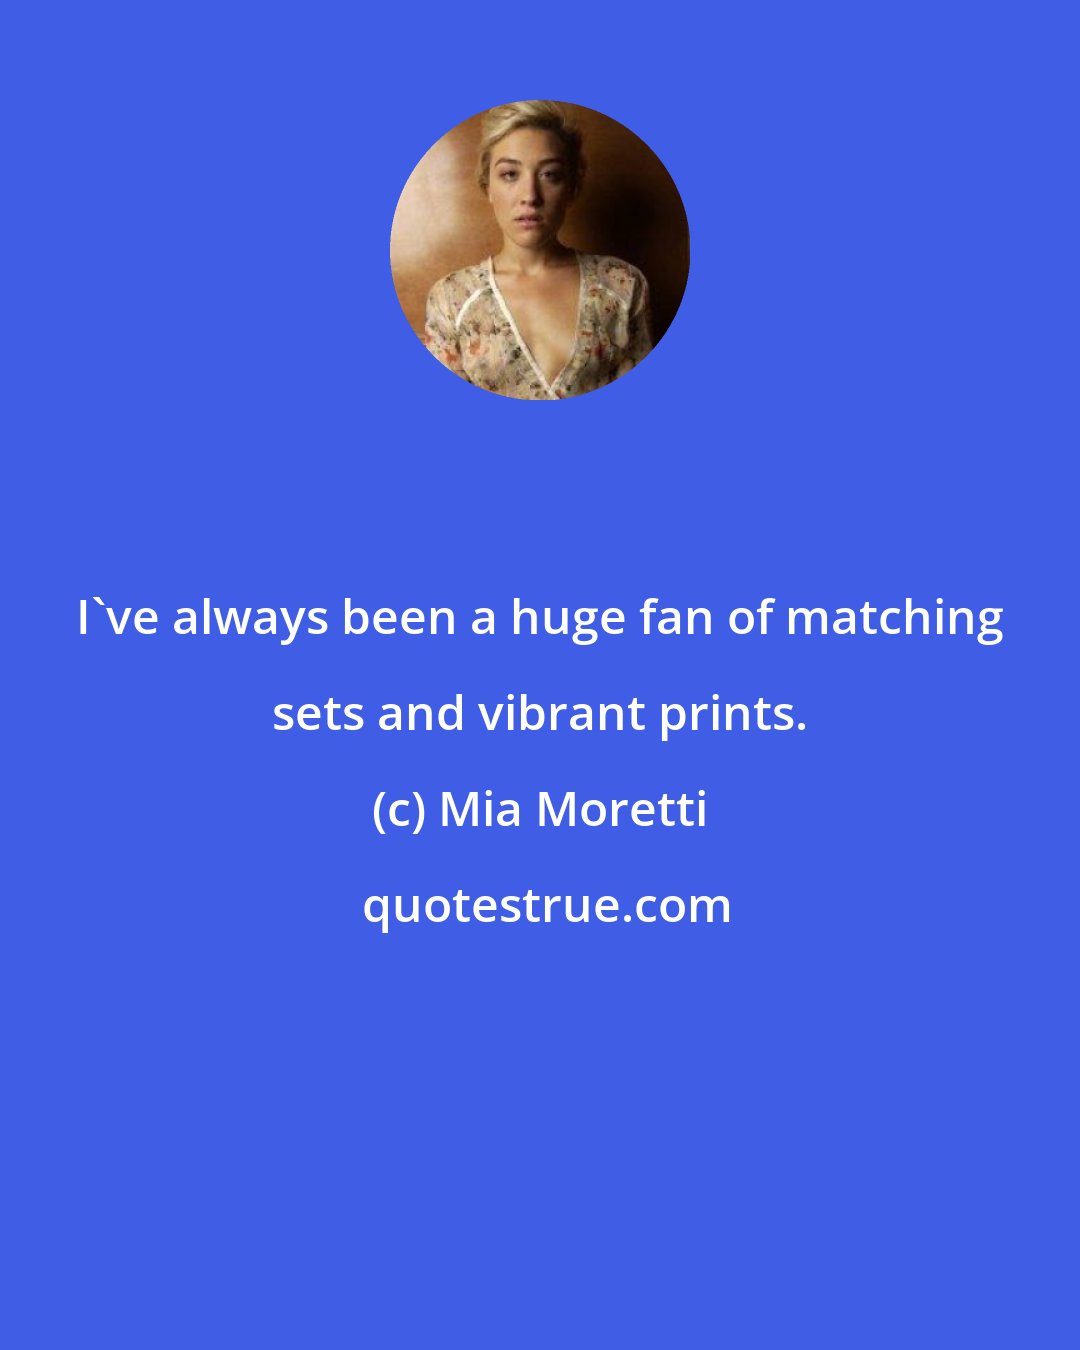 Mia Moretti: I've always been a huge fan of matching sets and vibrant prints.